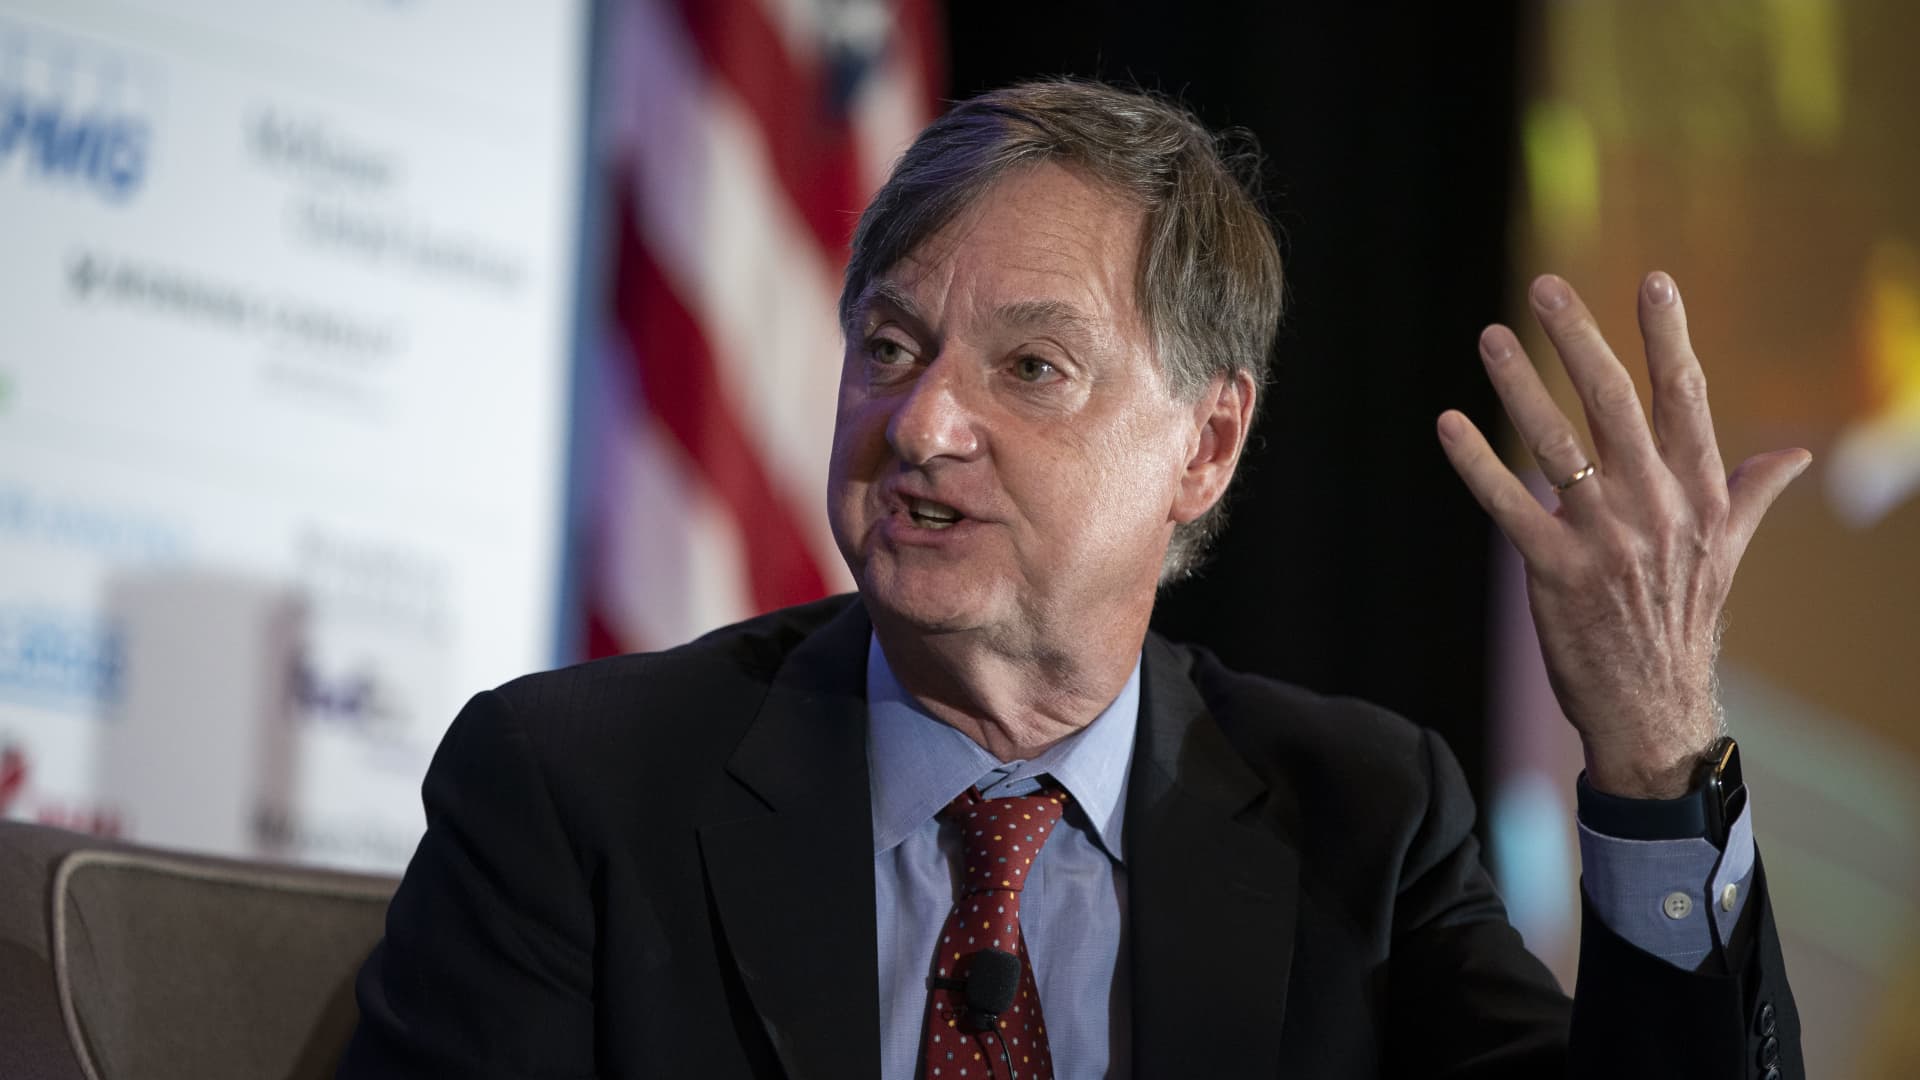 Fed’s Evans says he’s getting a little nervous about going too far, too fast with rate hikes